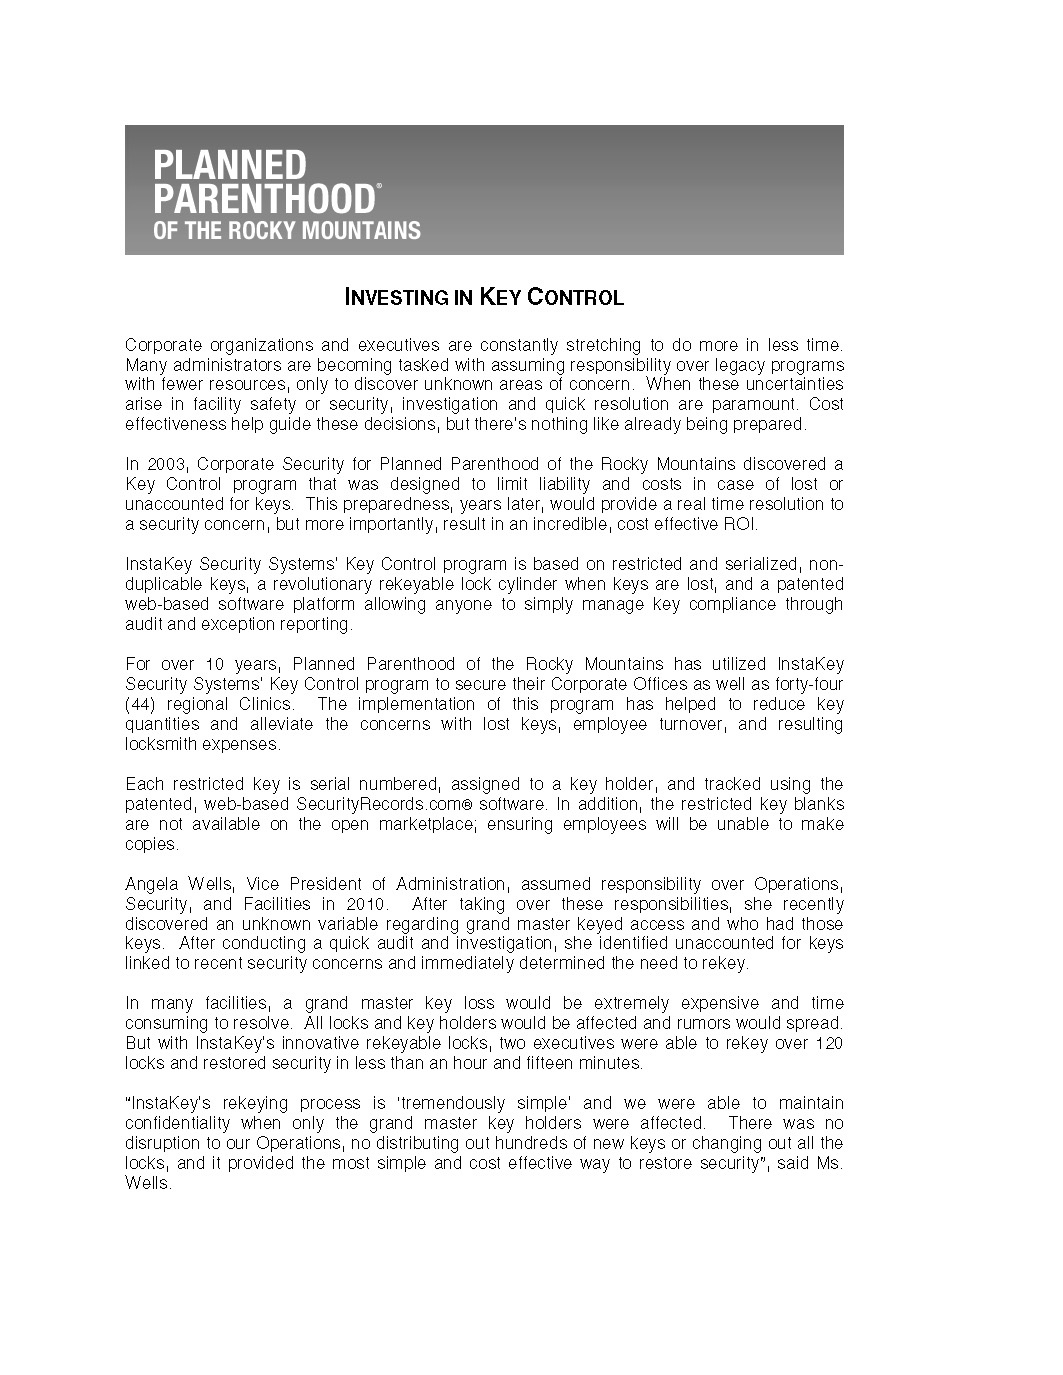 Planned Parenthood of the Rocky Mountains – Investing in Key Control